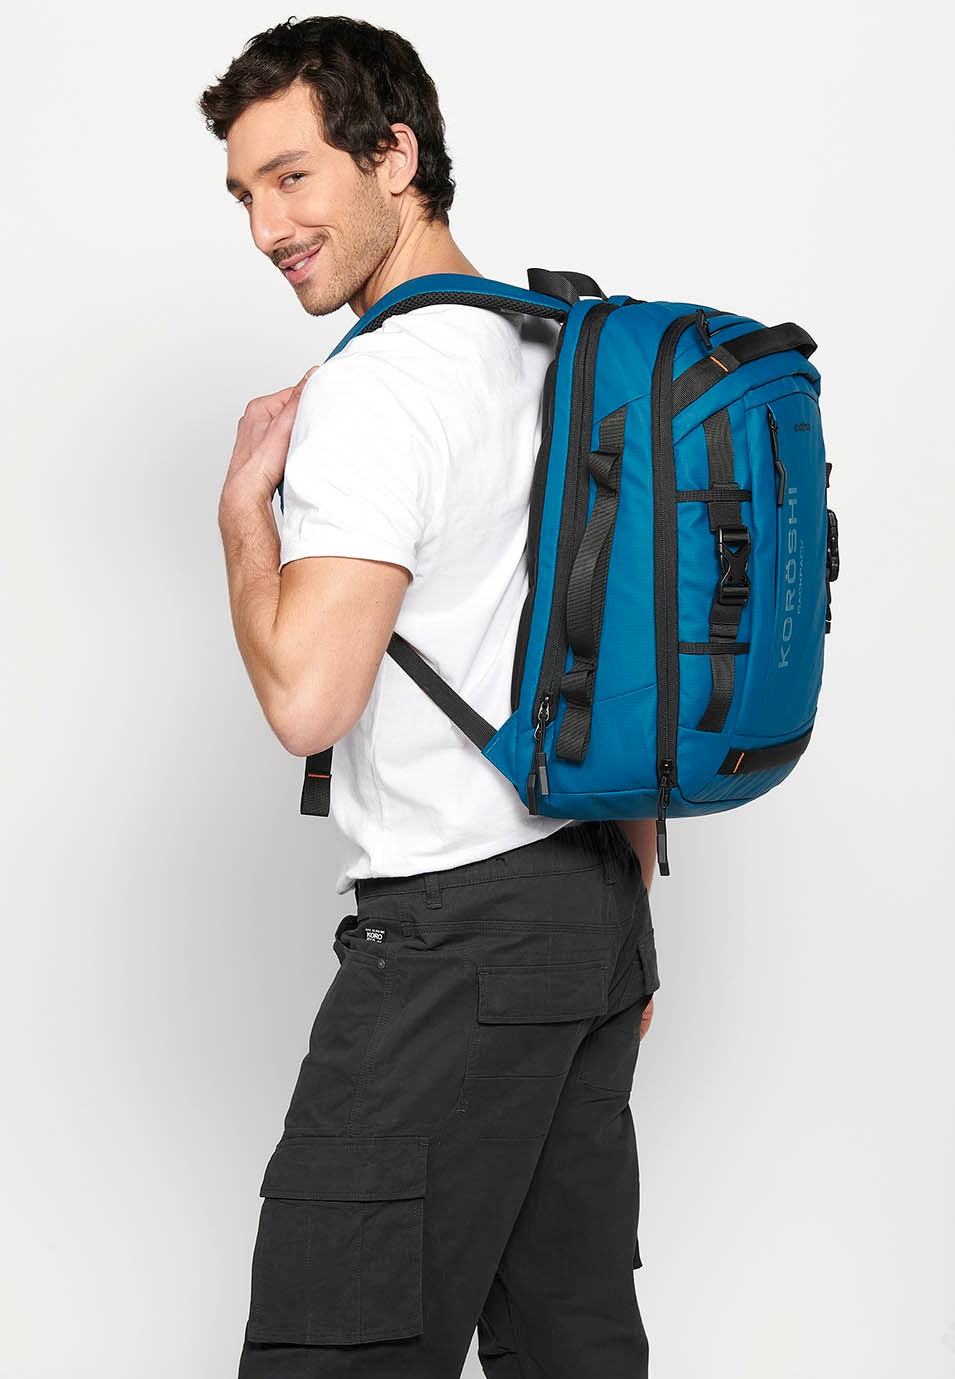 Koröshi backpack with two zippered compartments, one for a laptop and adjustable straps in Blue 5